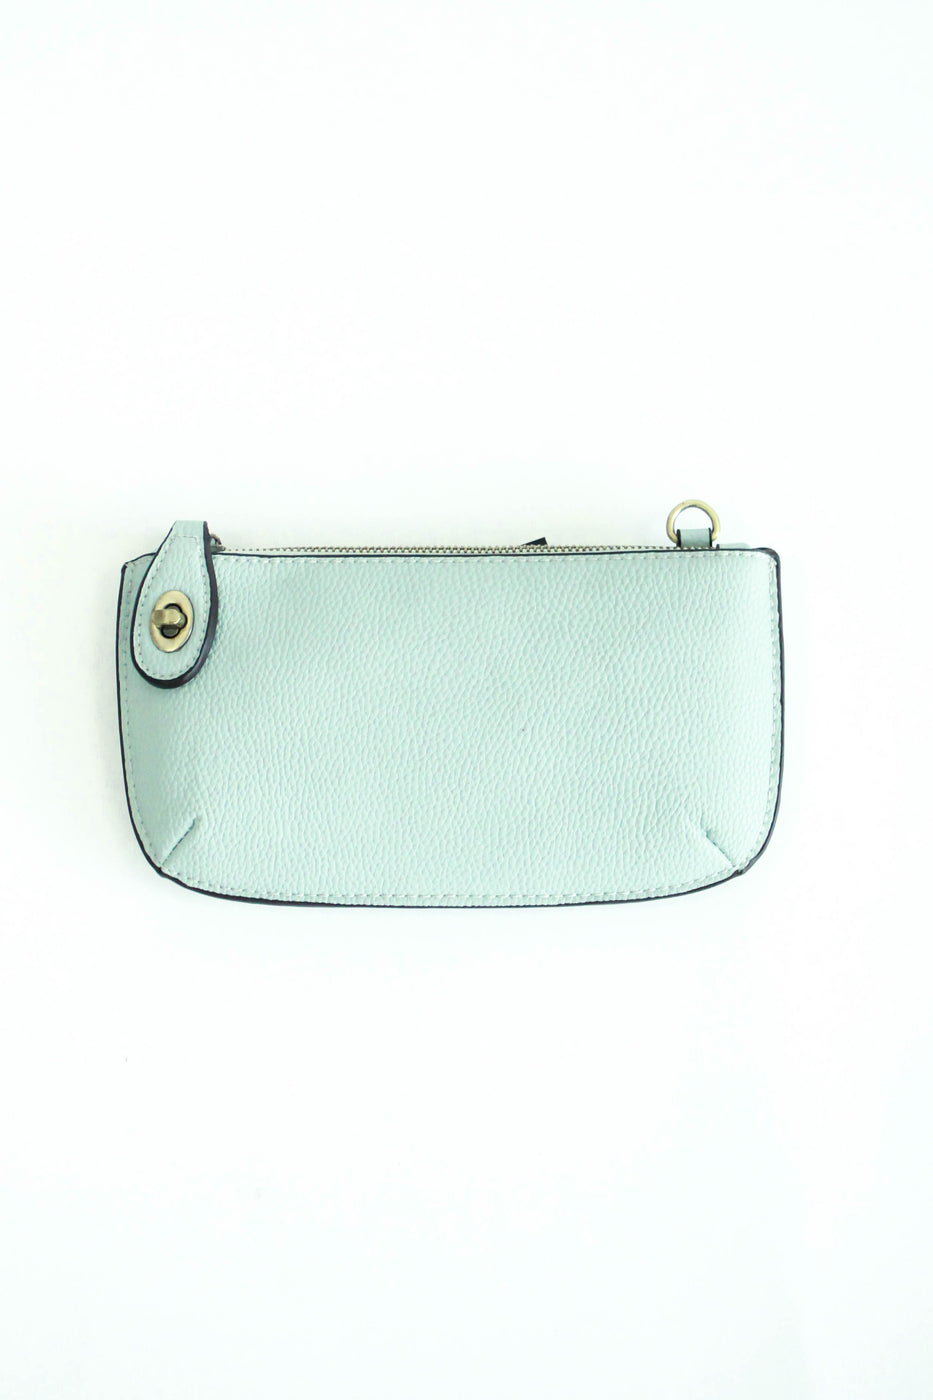 Uptown Messenger Purse in Pale Blue | ROOLEE